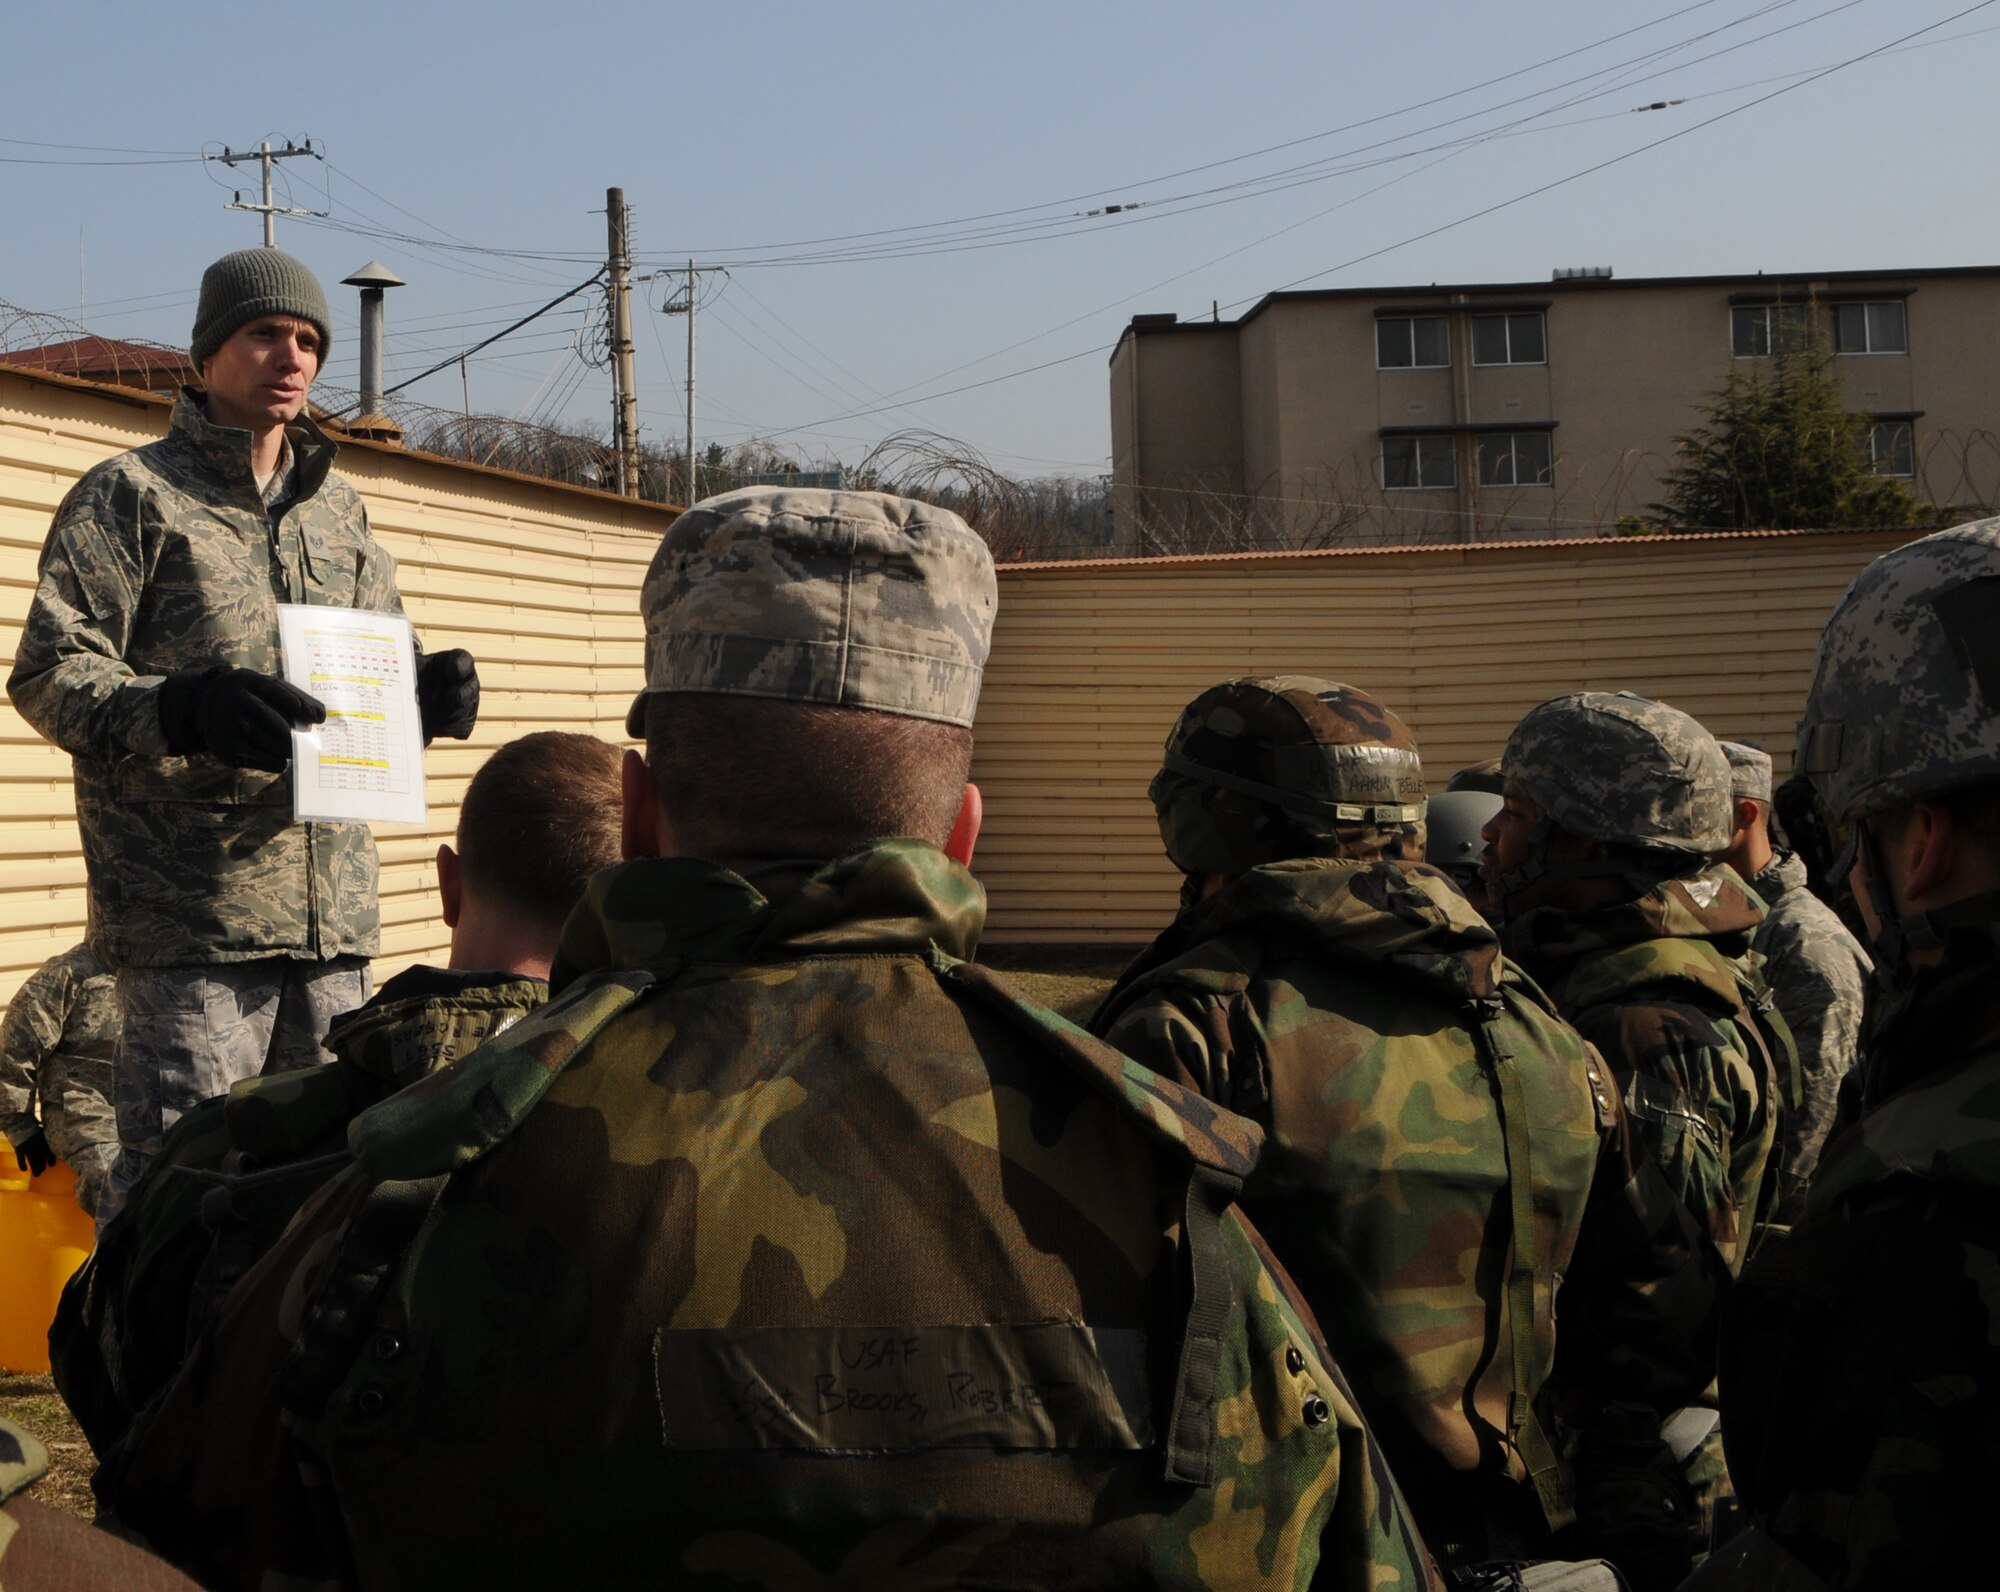 DAEGU AIR BASE, Republic of Korea -- Staff Sgt. Daniel Van Stone, the 353rd Operations Support Squadron emergency management specialist, instructs members of the 353rd Special Operations Group on how to properly conduct searches around buildings after an attack during training here March 19. The training is in preparation for the group's annual operational readiness exercise which affords unit members an opportunity to practice wartime skills necessary for their ability to survive and operate. (U.S. Air Force photo by Tech. Sgt. Aaron Cram)